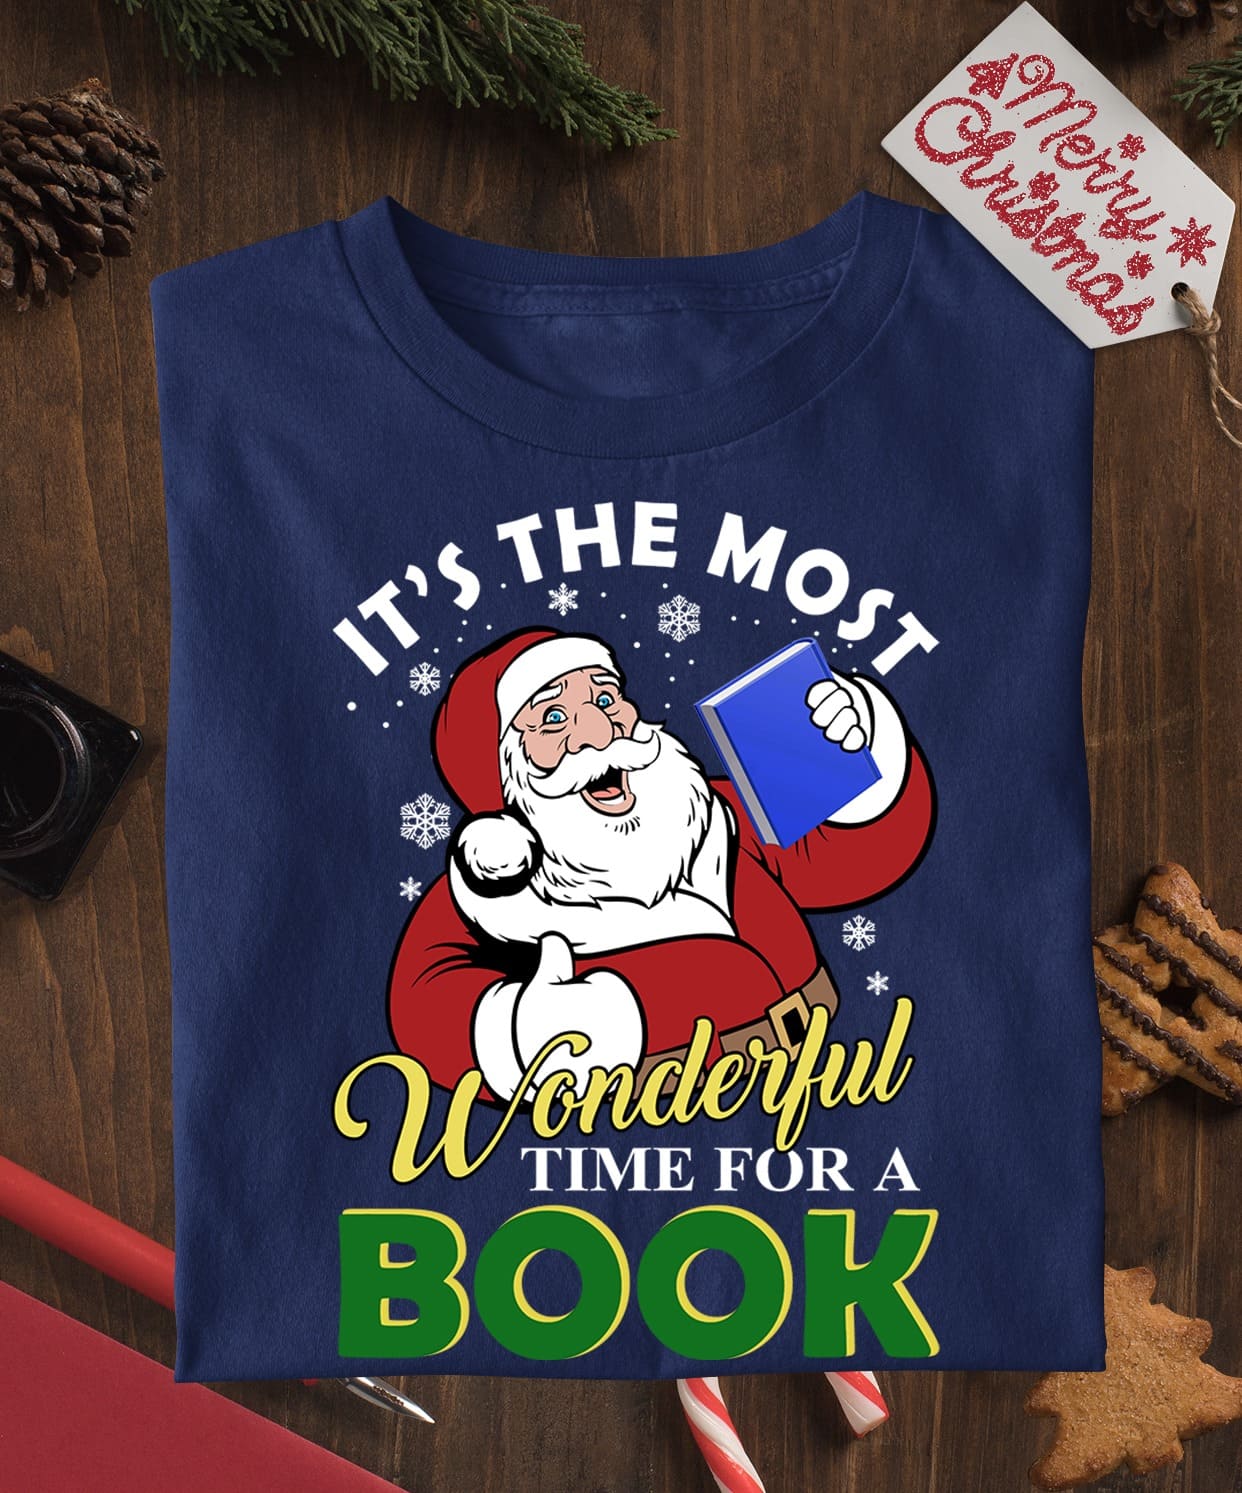 It's the most wonderful time for a book - Santa Claus and book, Reading book on Christmas